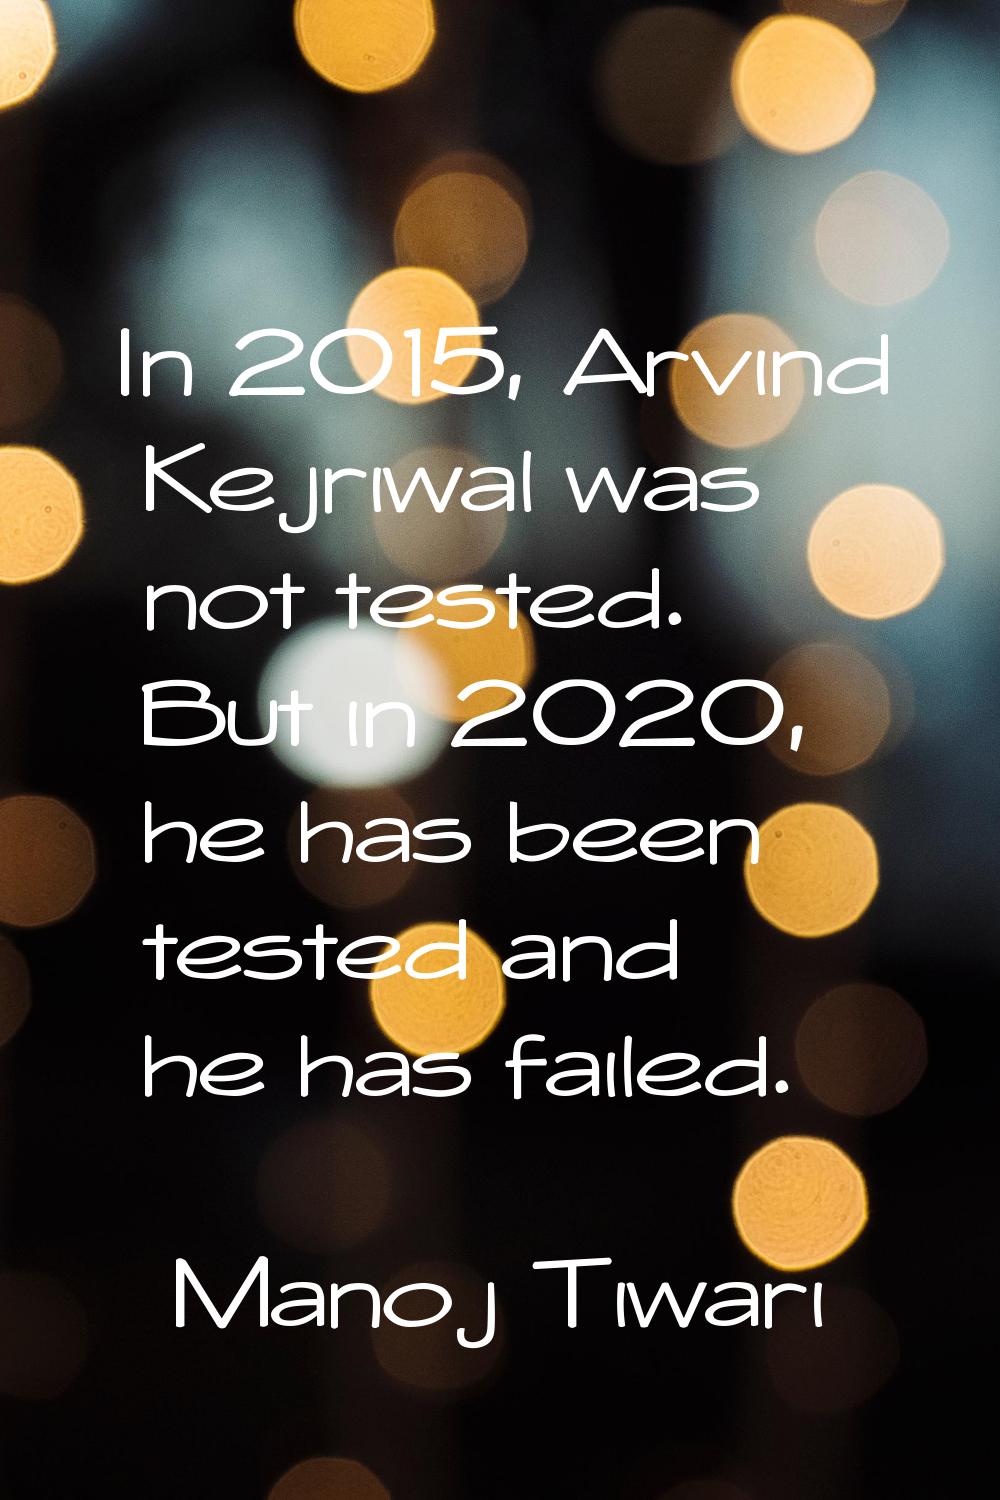 In 2015, Arvind Kejriwal was not tested. But in 2020, he has been tested and he has failed.